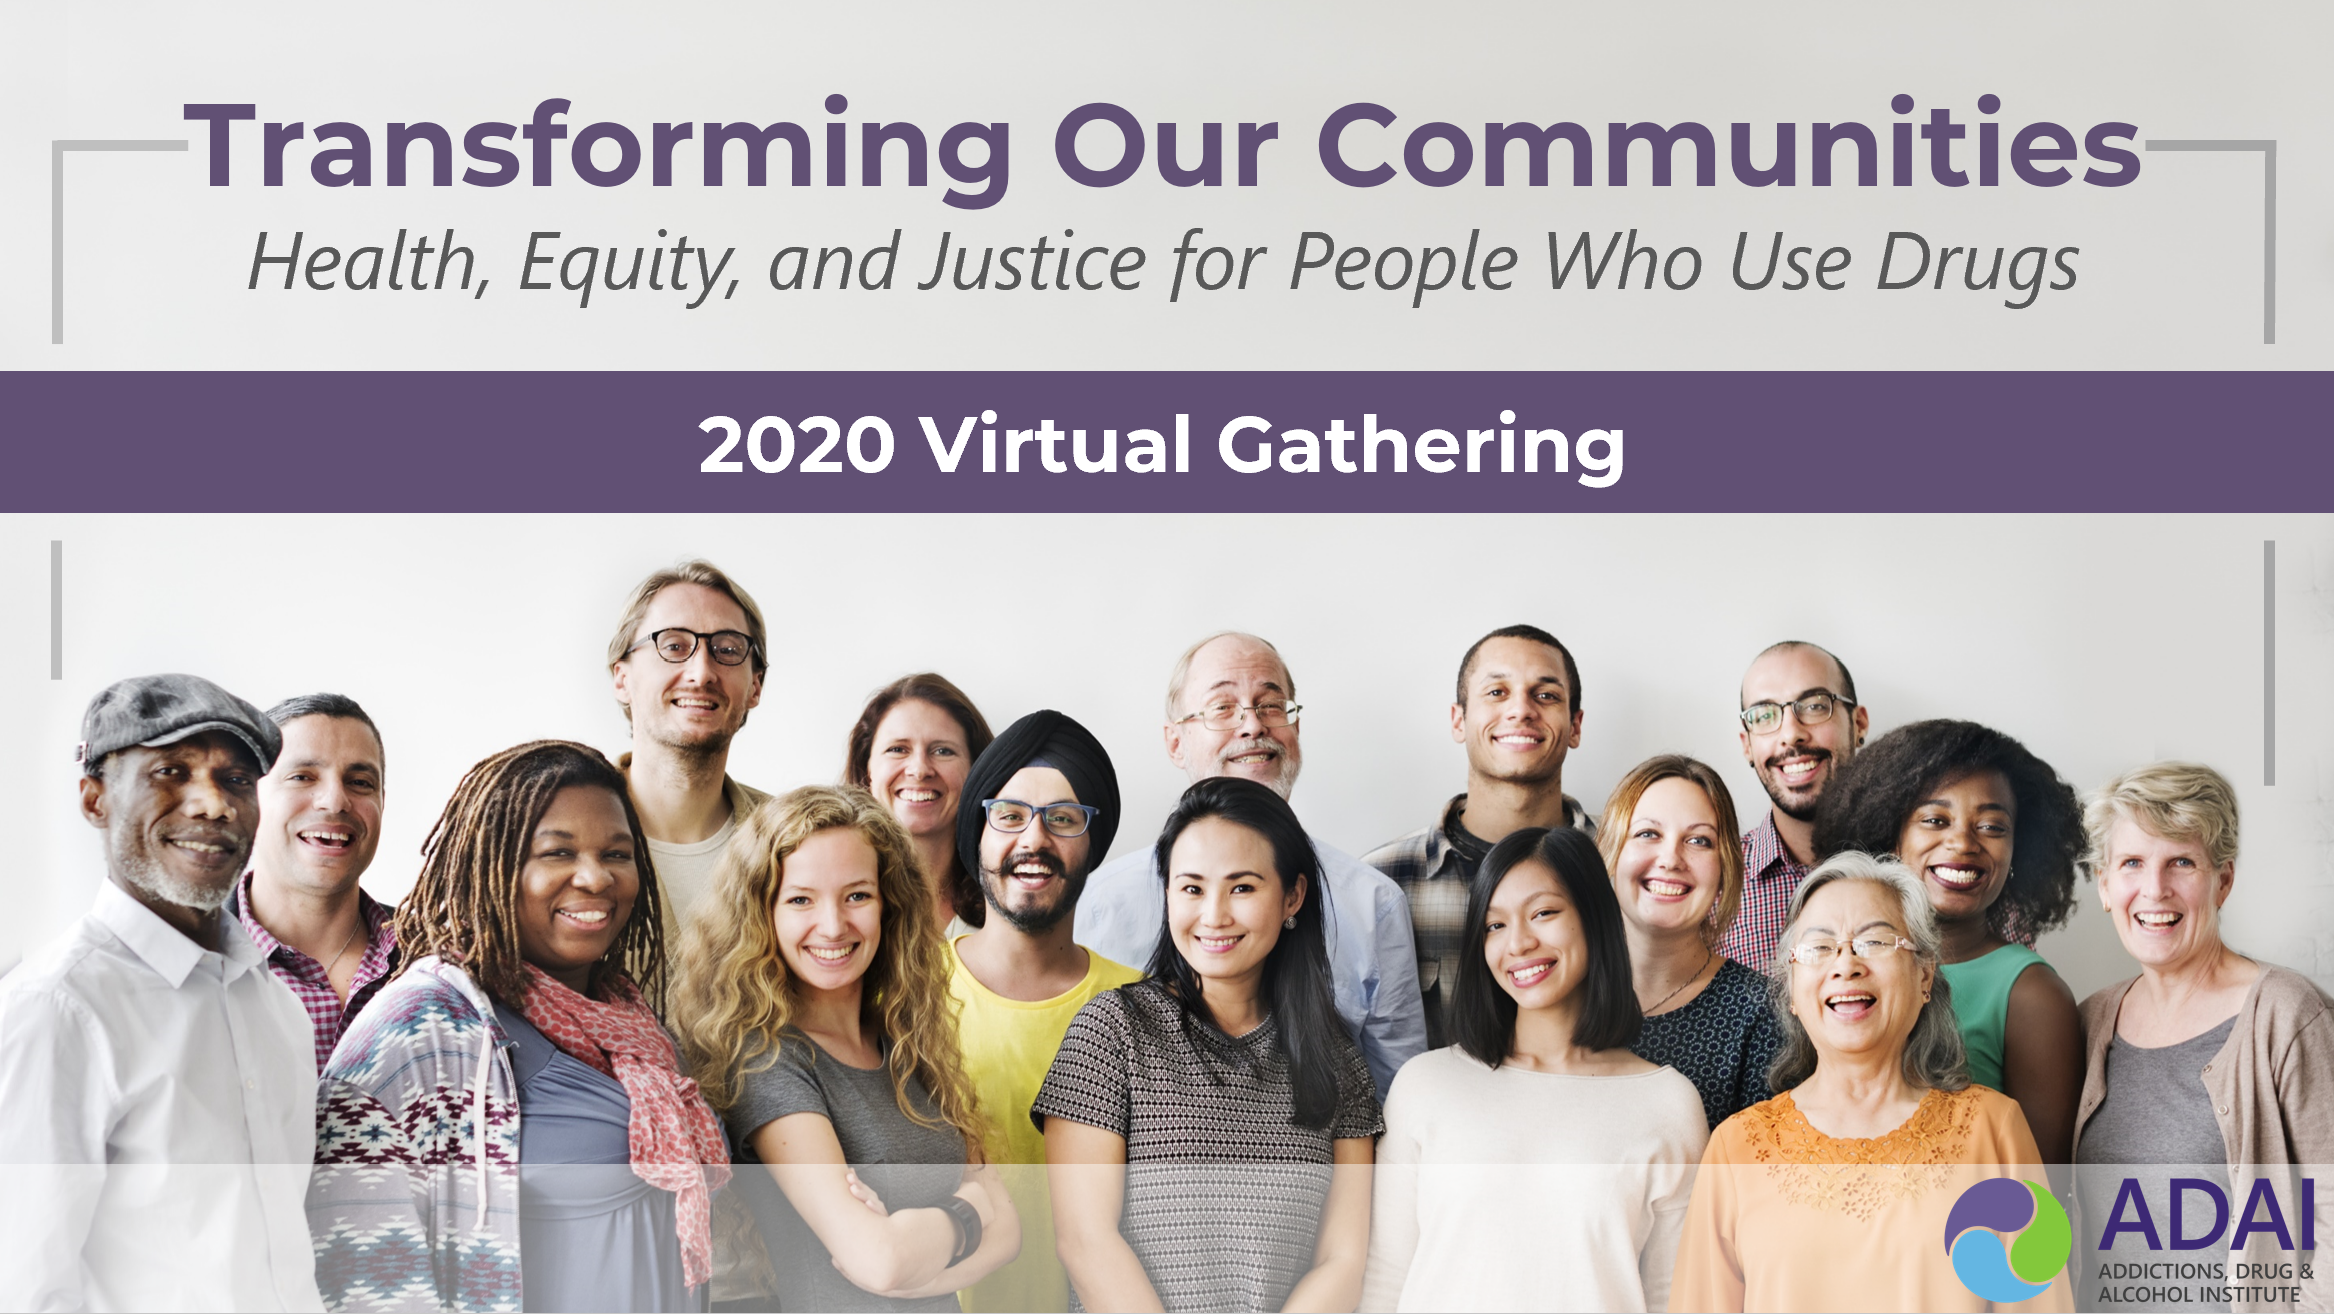 Transforming Our Communities: Health, Equity, and Justice for People Who Use Drugs. 2020 Virtual Gathering. Background image of people of all different ages and races